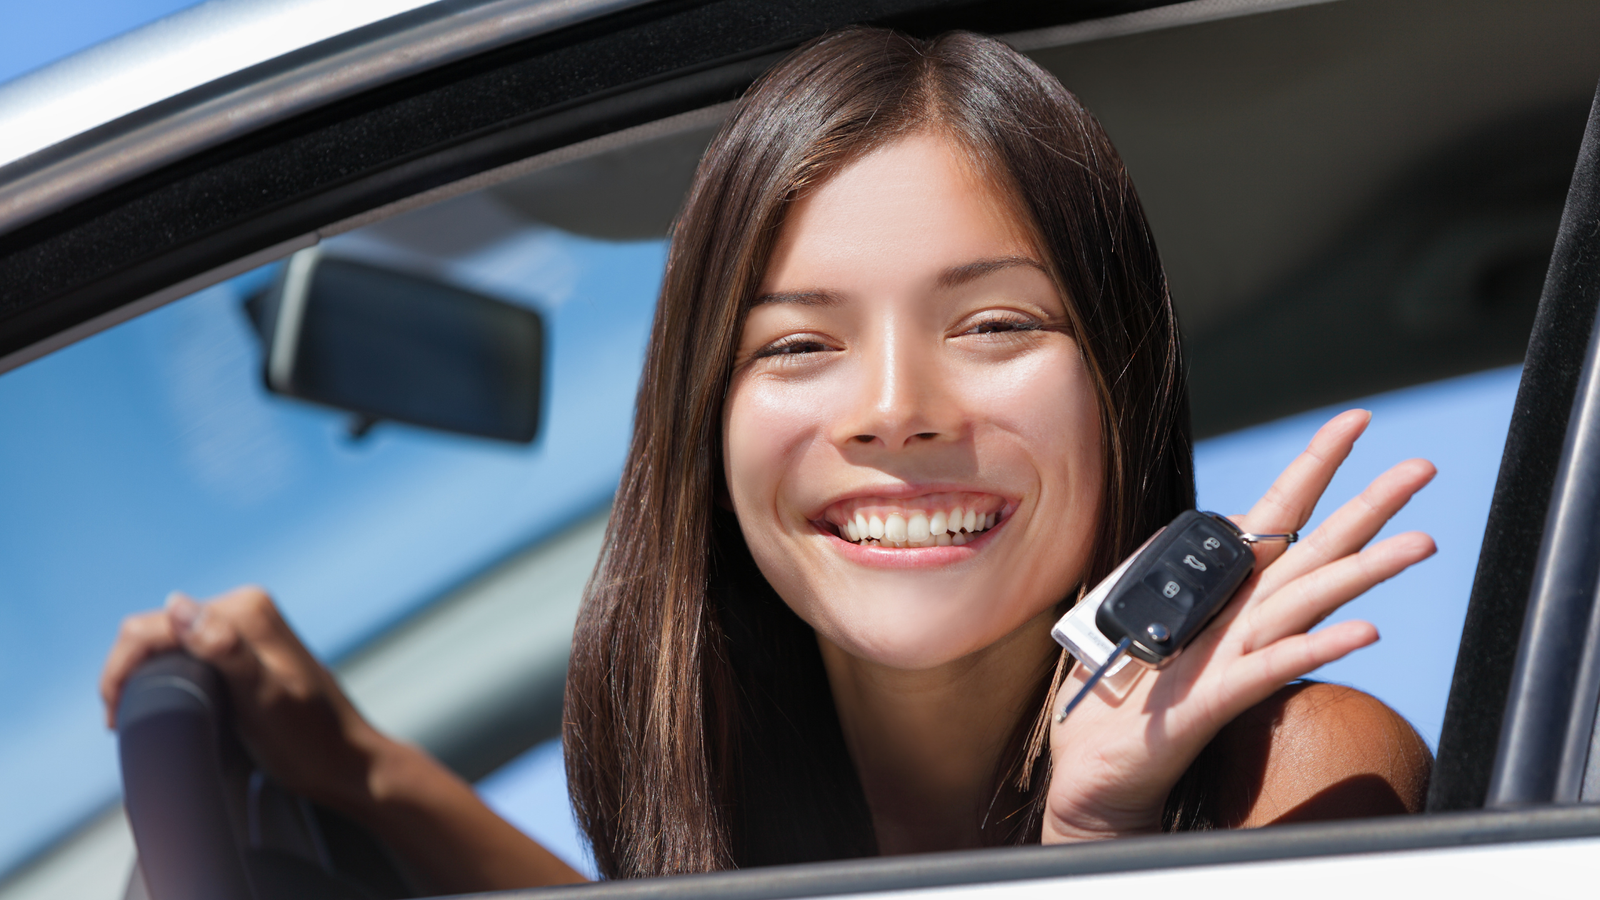 Family Matters: How to Shop for Auto Insurance with Teen Drivers